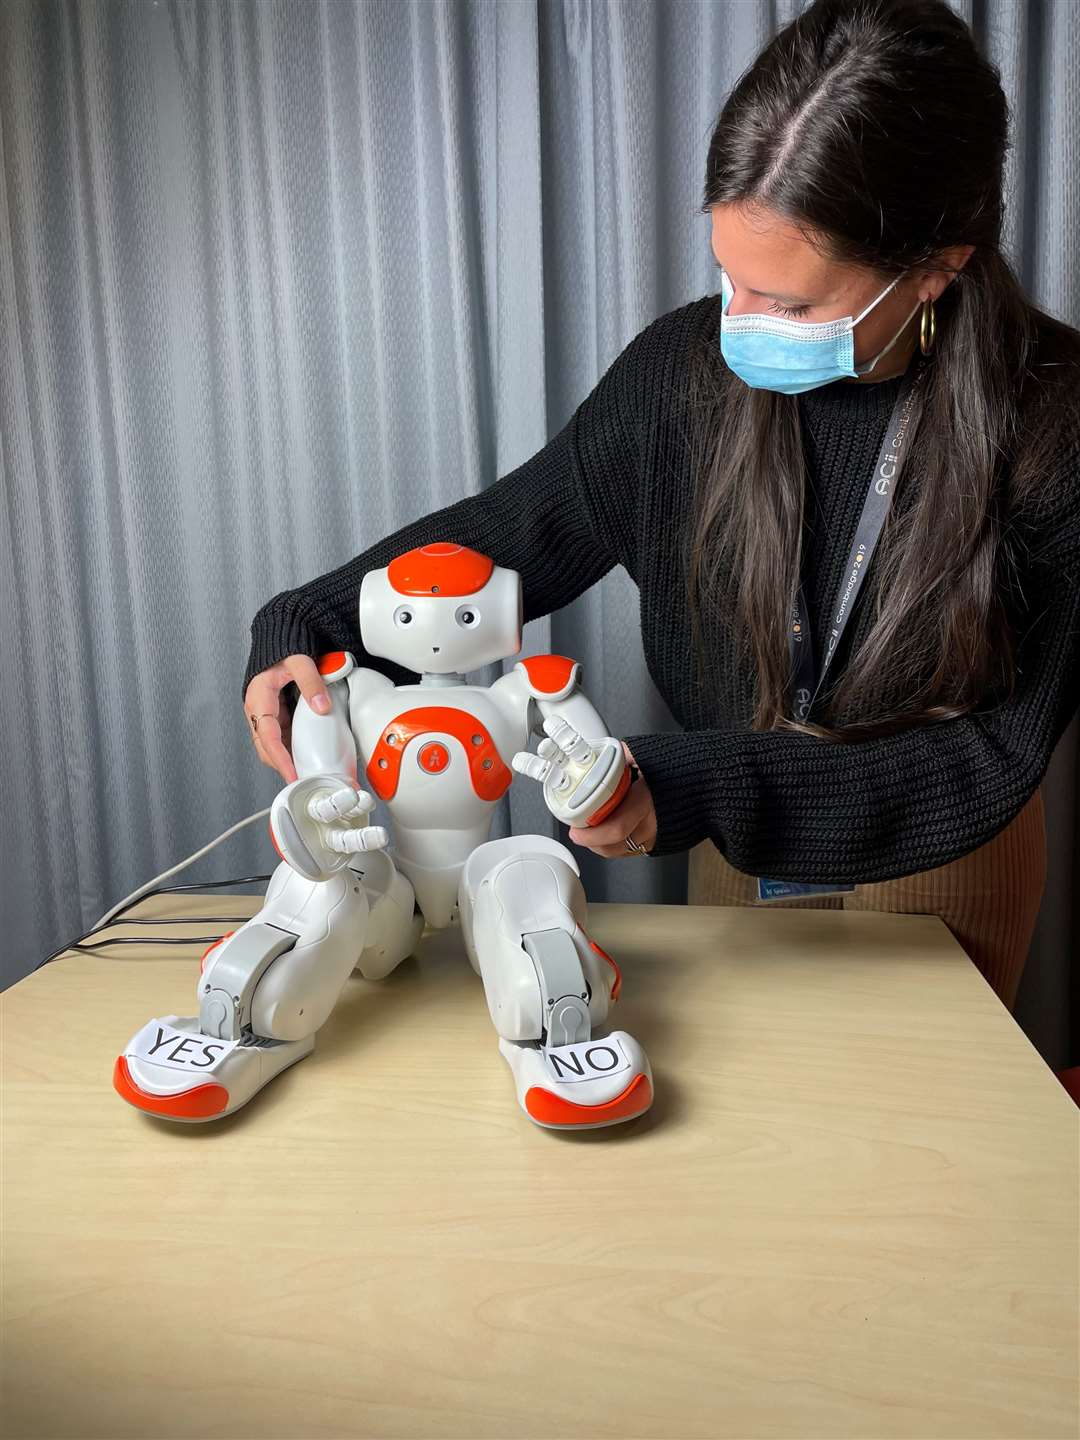 Children interacted with the robot by speaking with it, or by touching sensors on the robot’s hands and feet. (Cambridge University/PA)